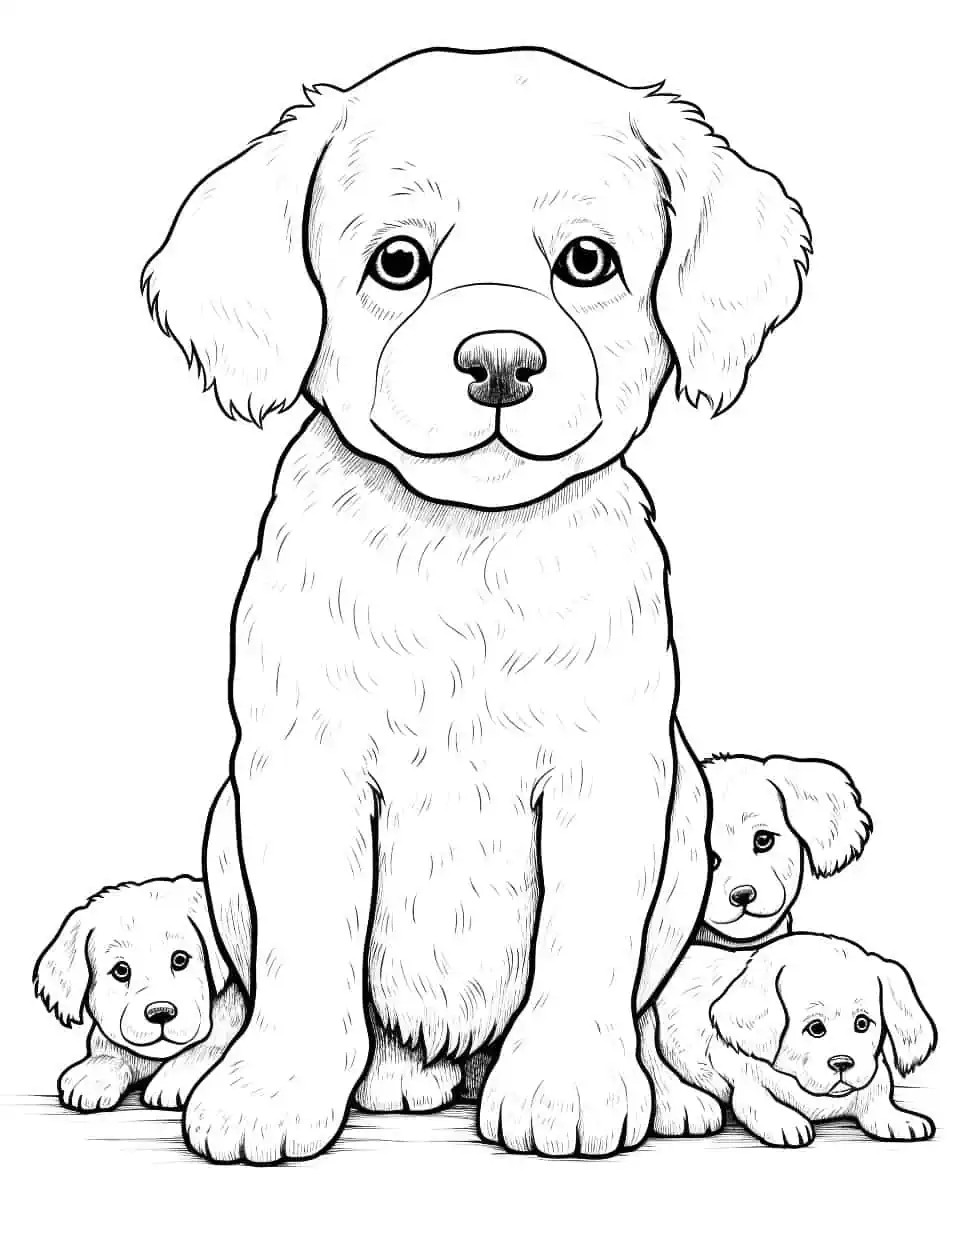 Poodle with Puppies Coloring Page - A loving Poodle mother taking care of her playful puppies.